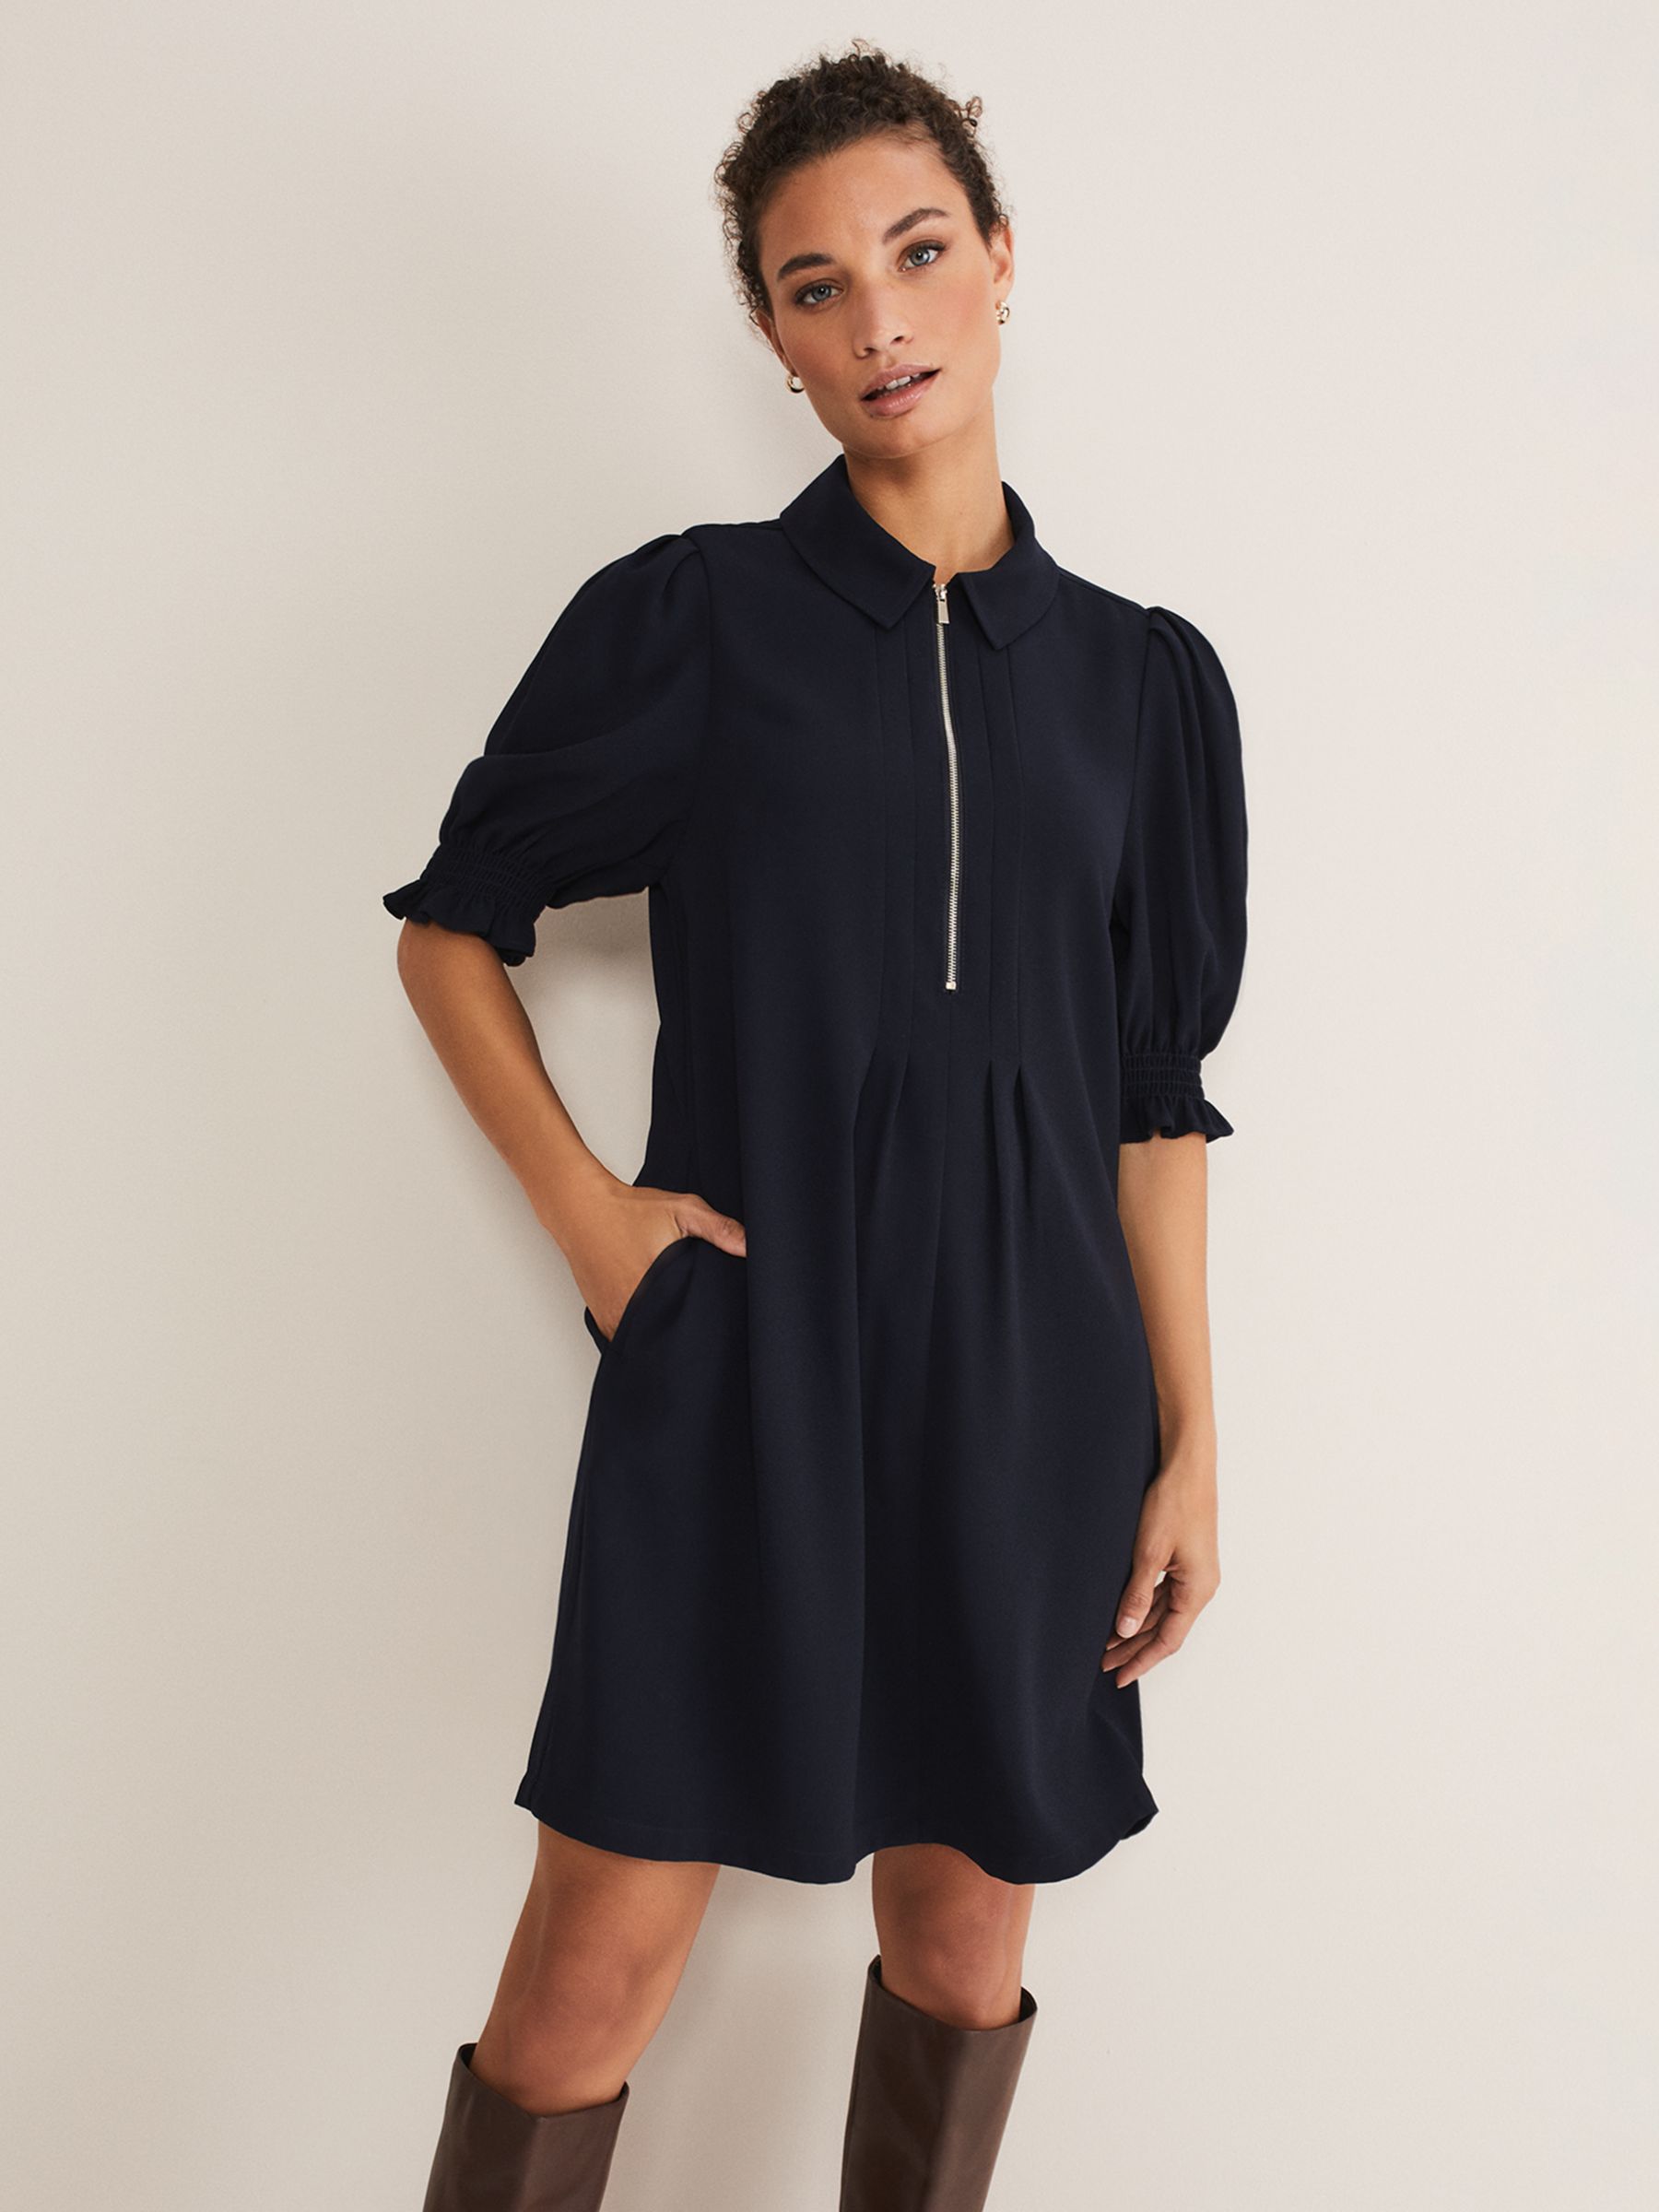 Black Tunic Dress with Statement Buttons, Phase Eight